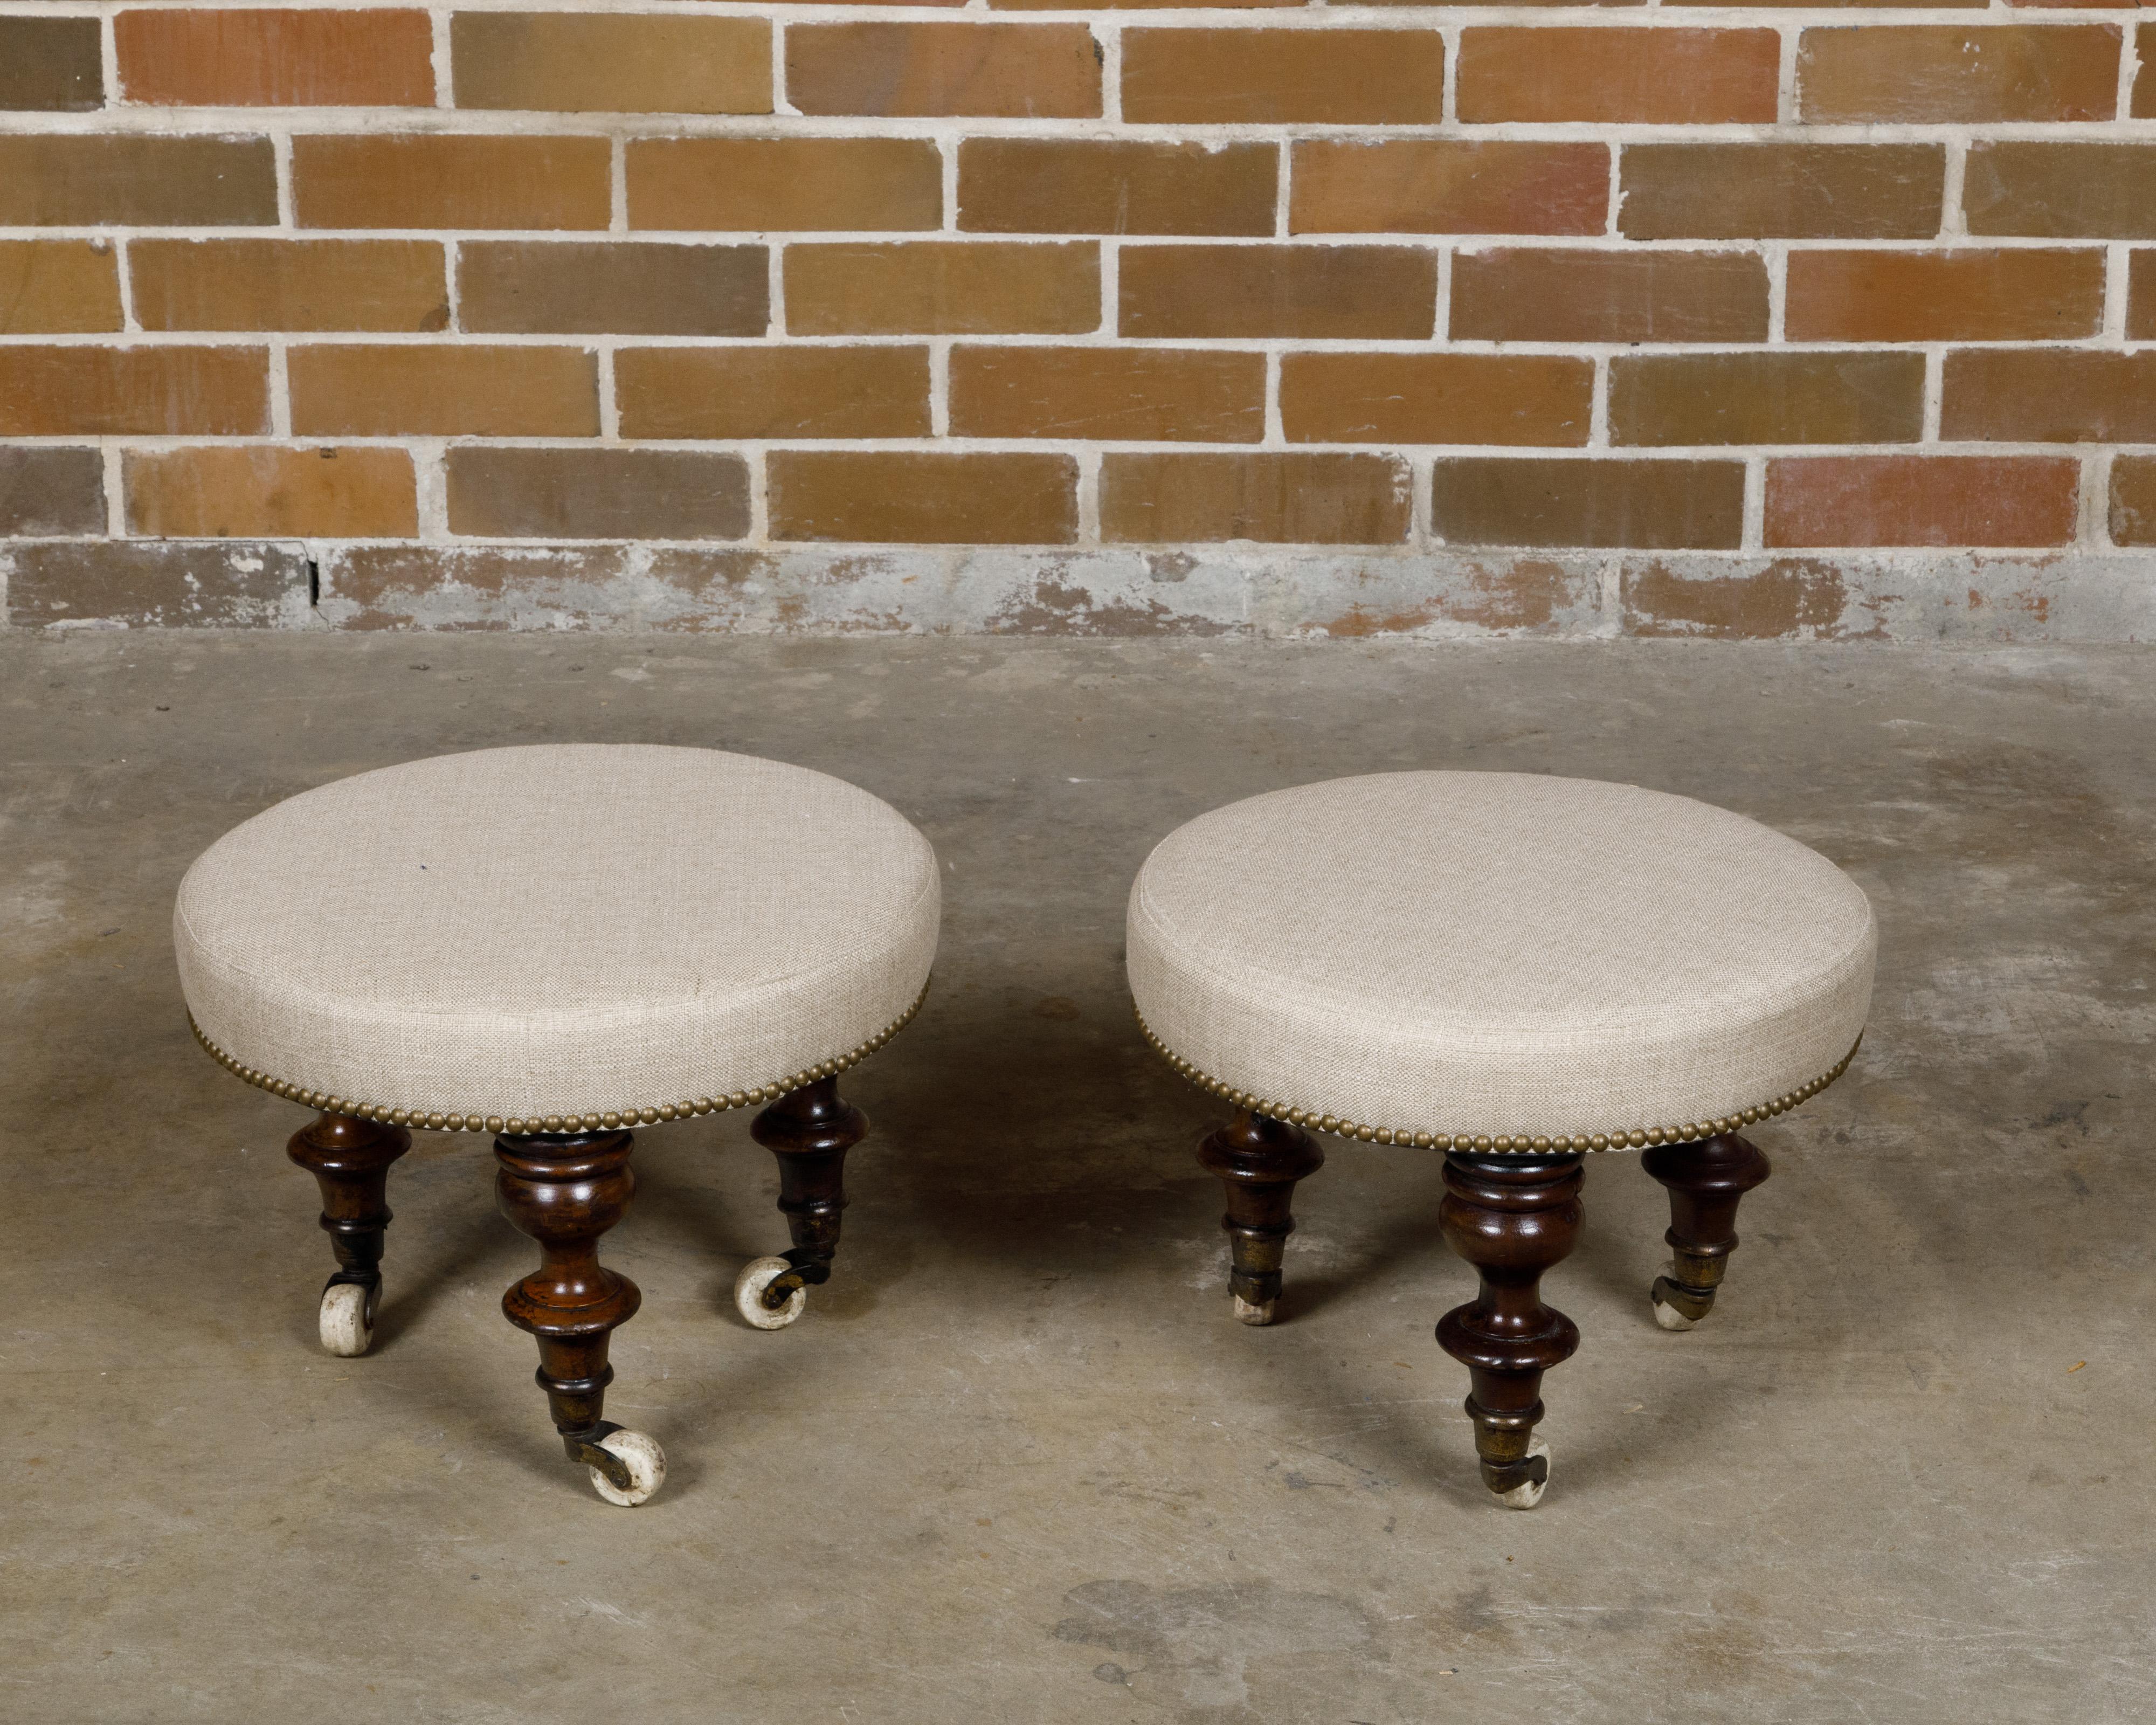 English Mahogany Stools with 19th Century Turned Legs on Casters, a Pair For Sale 5